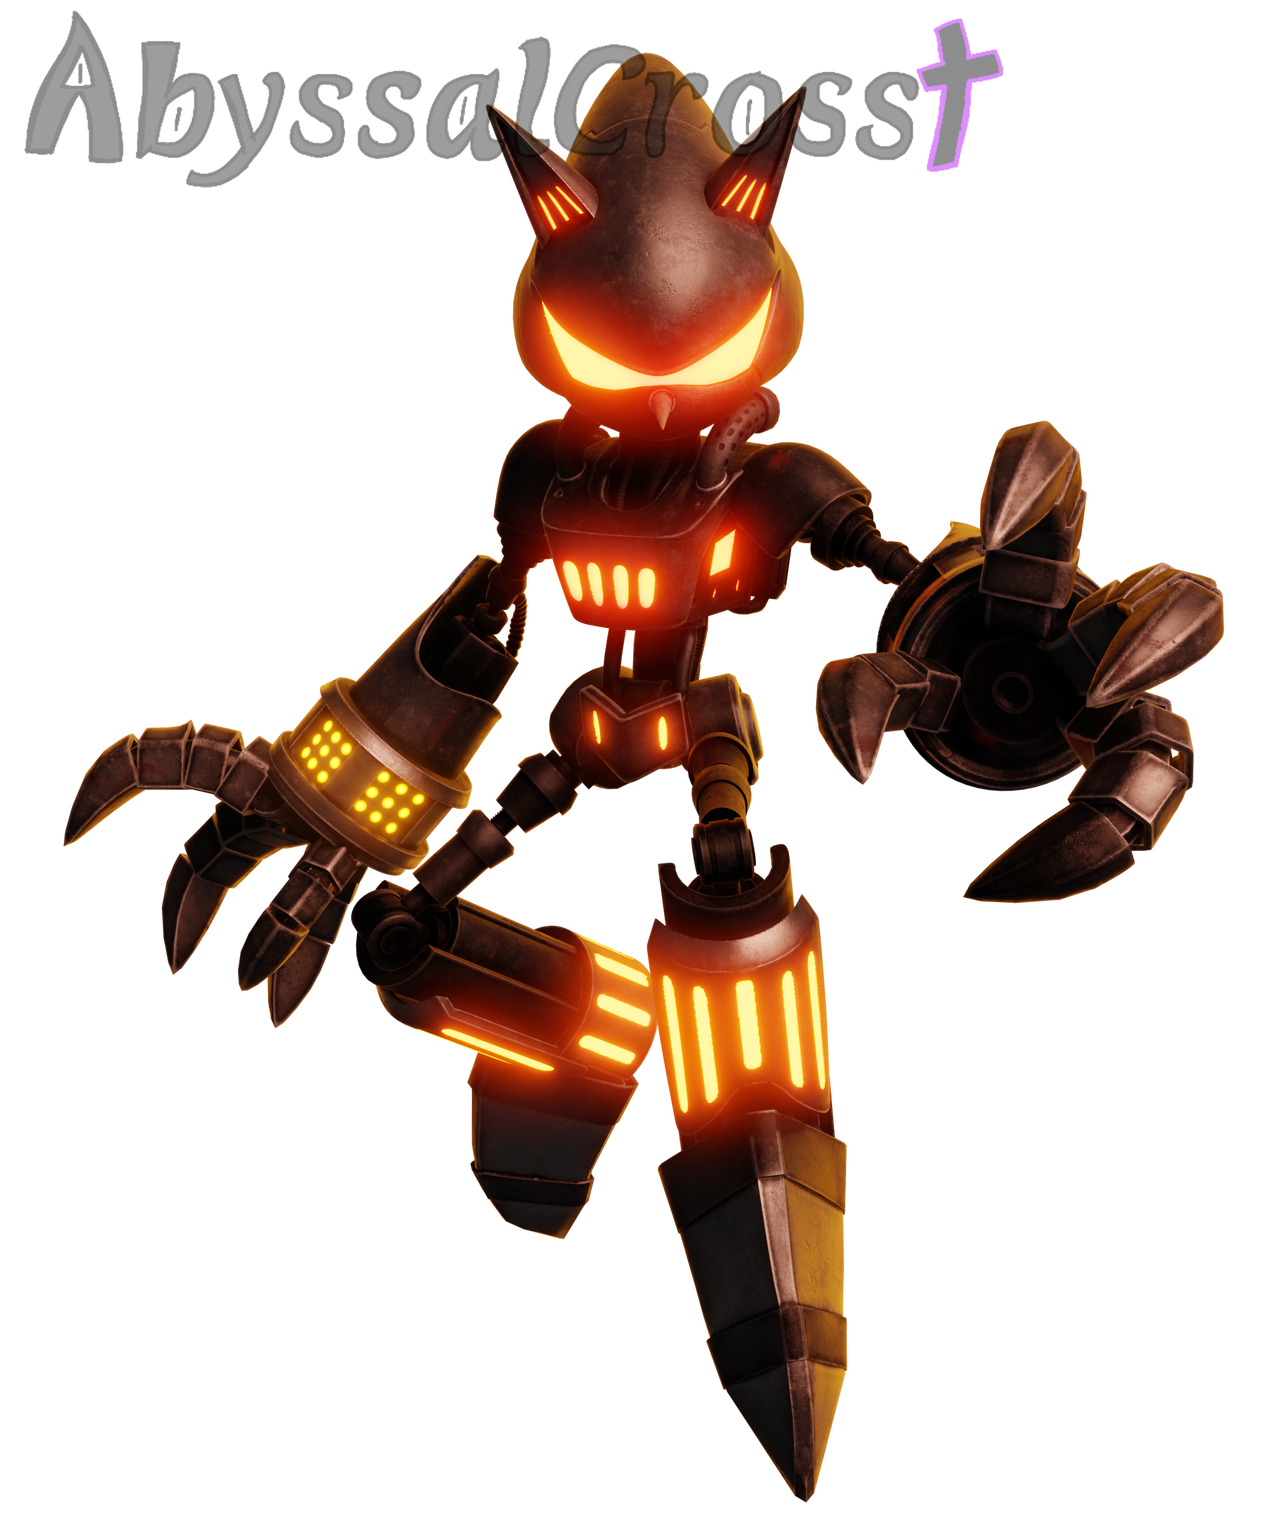 Furnace Metal sonic - Download Free 3D model by Mittergen (@3774428638)  [4a74a98]